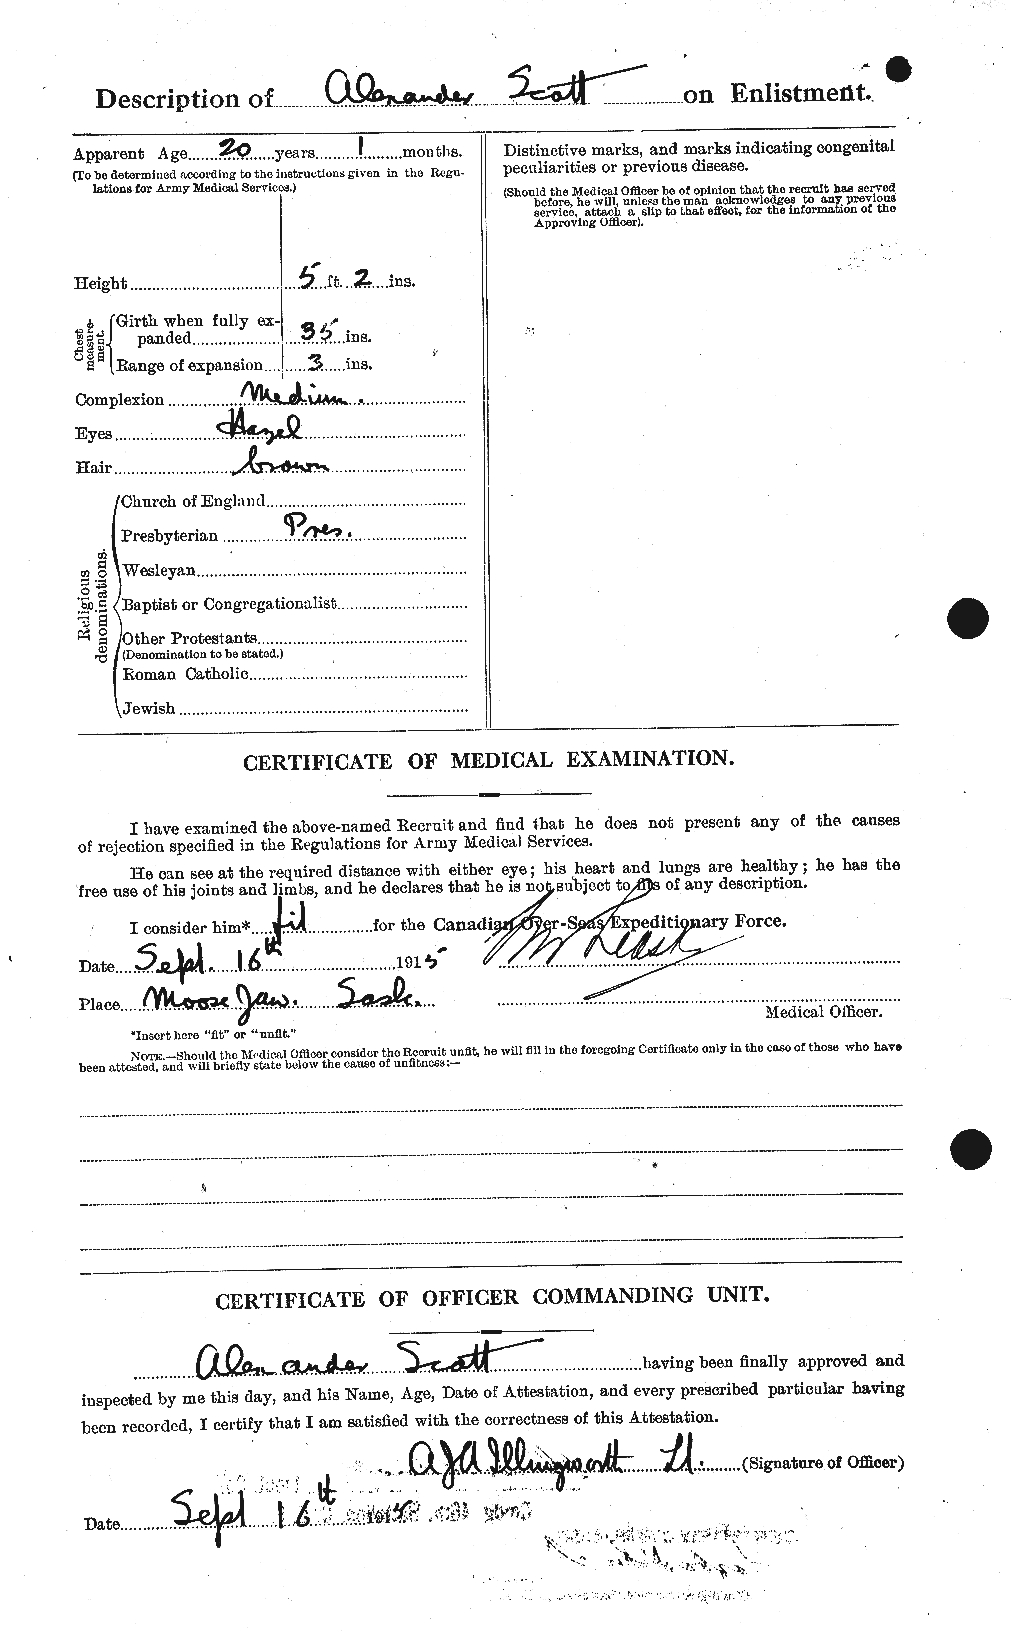 Personnel Records of the First World War - CEF 086613b